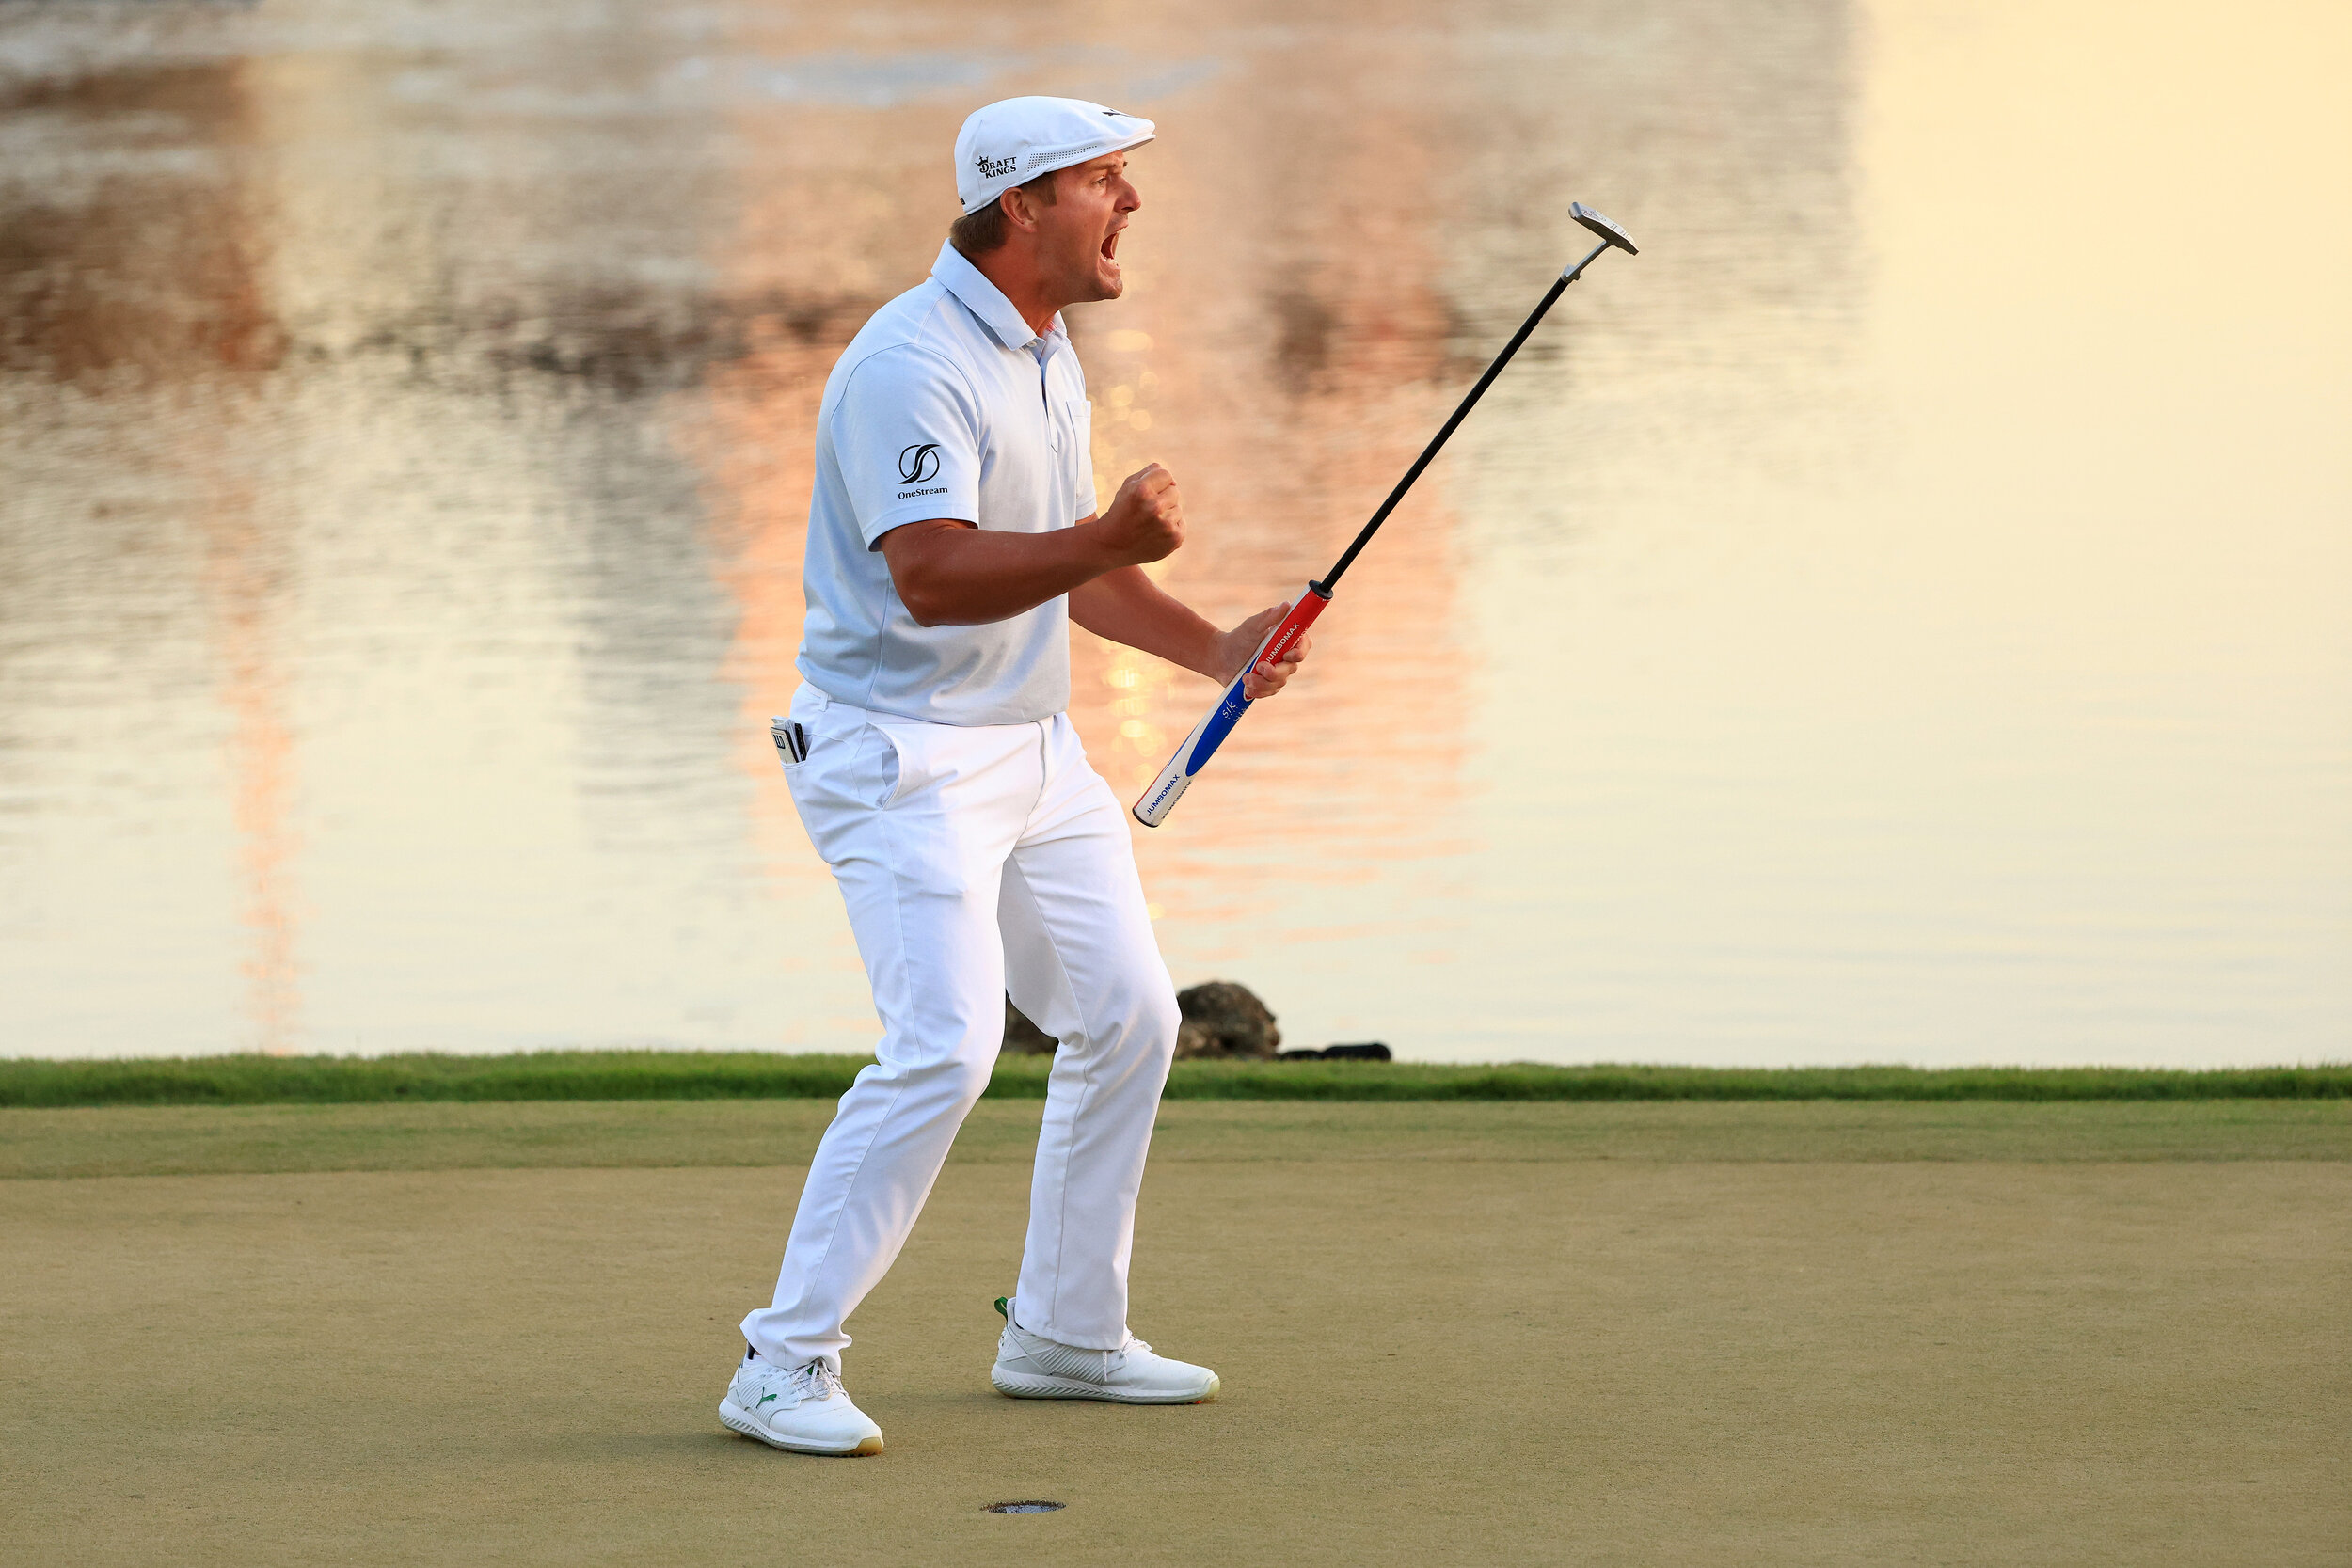  ORLANDO, FLORIDA - MARCH 07: Bryson DeChambeau of the United States celebrates making his putt on the 18th green to win during the final round of the Arnold Palmer Invitational Presented by MasterCard at the Bay Hill Club and Lodge on March 07, 2021